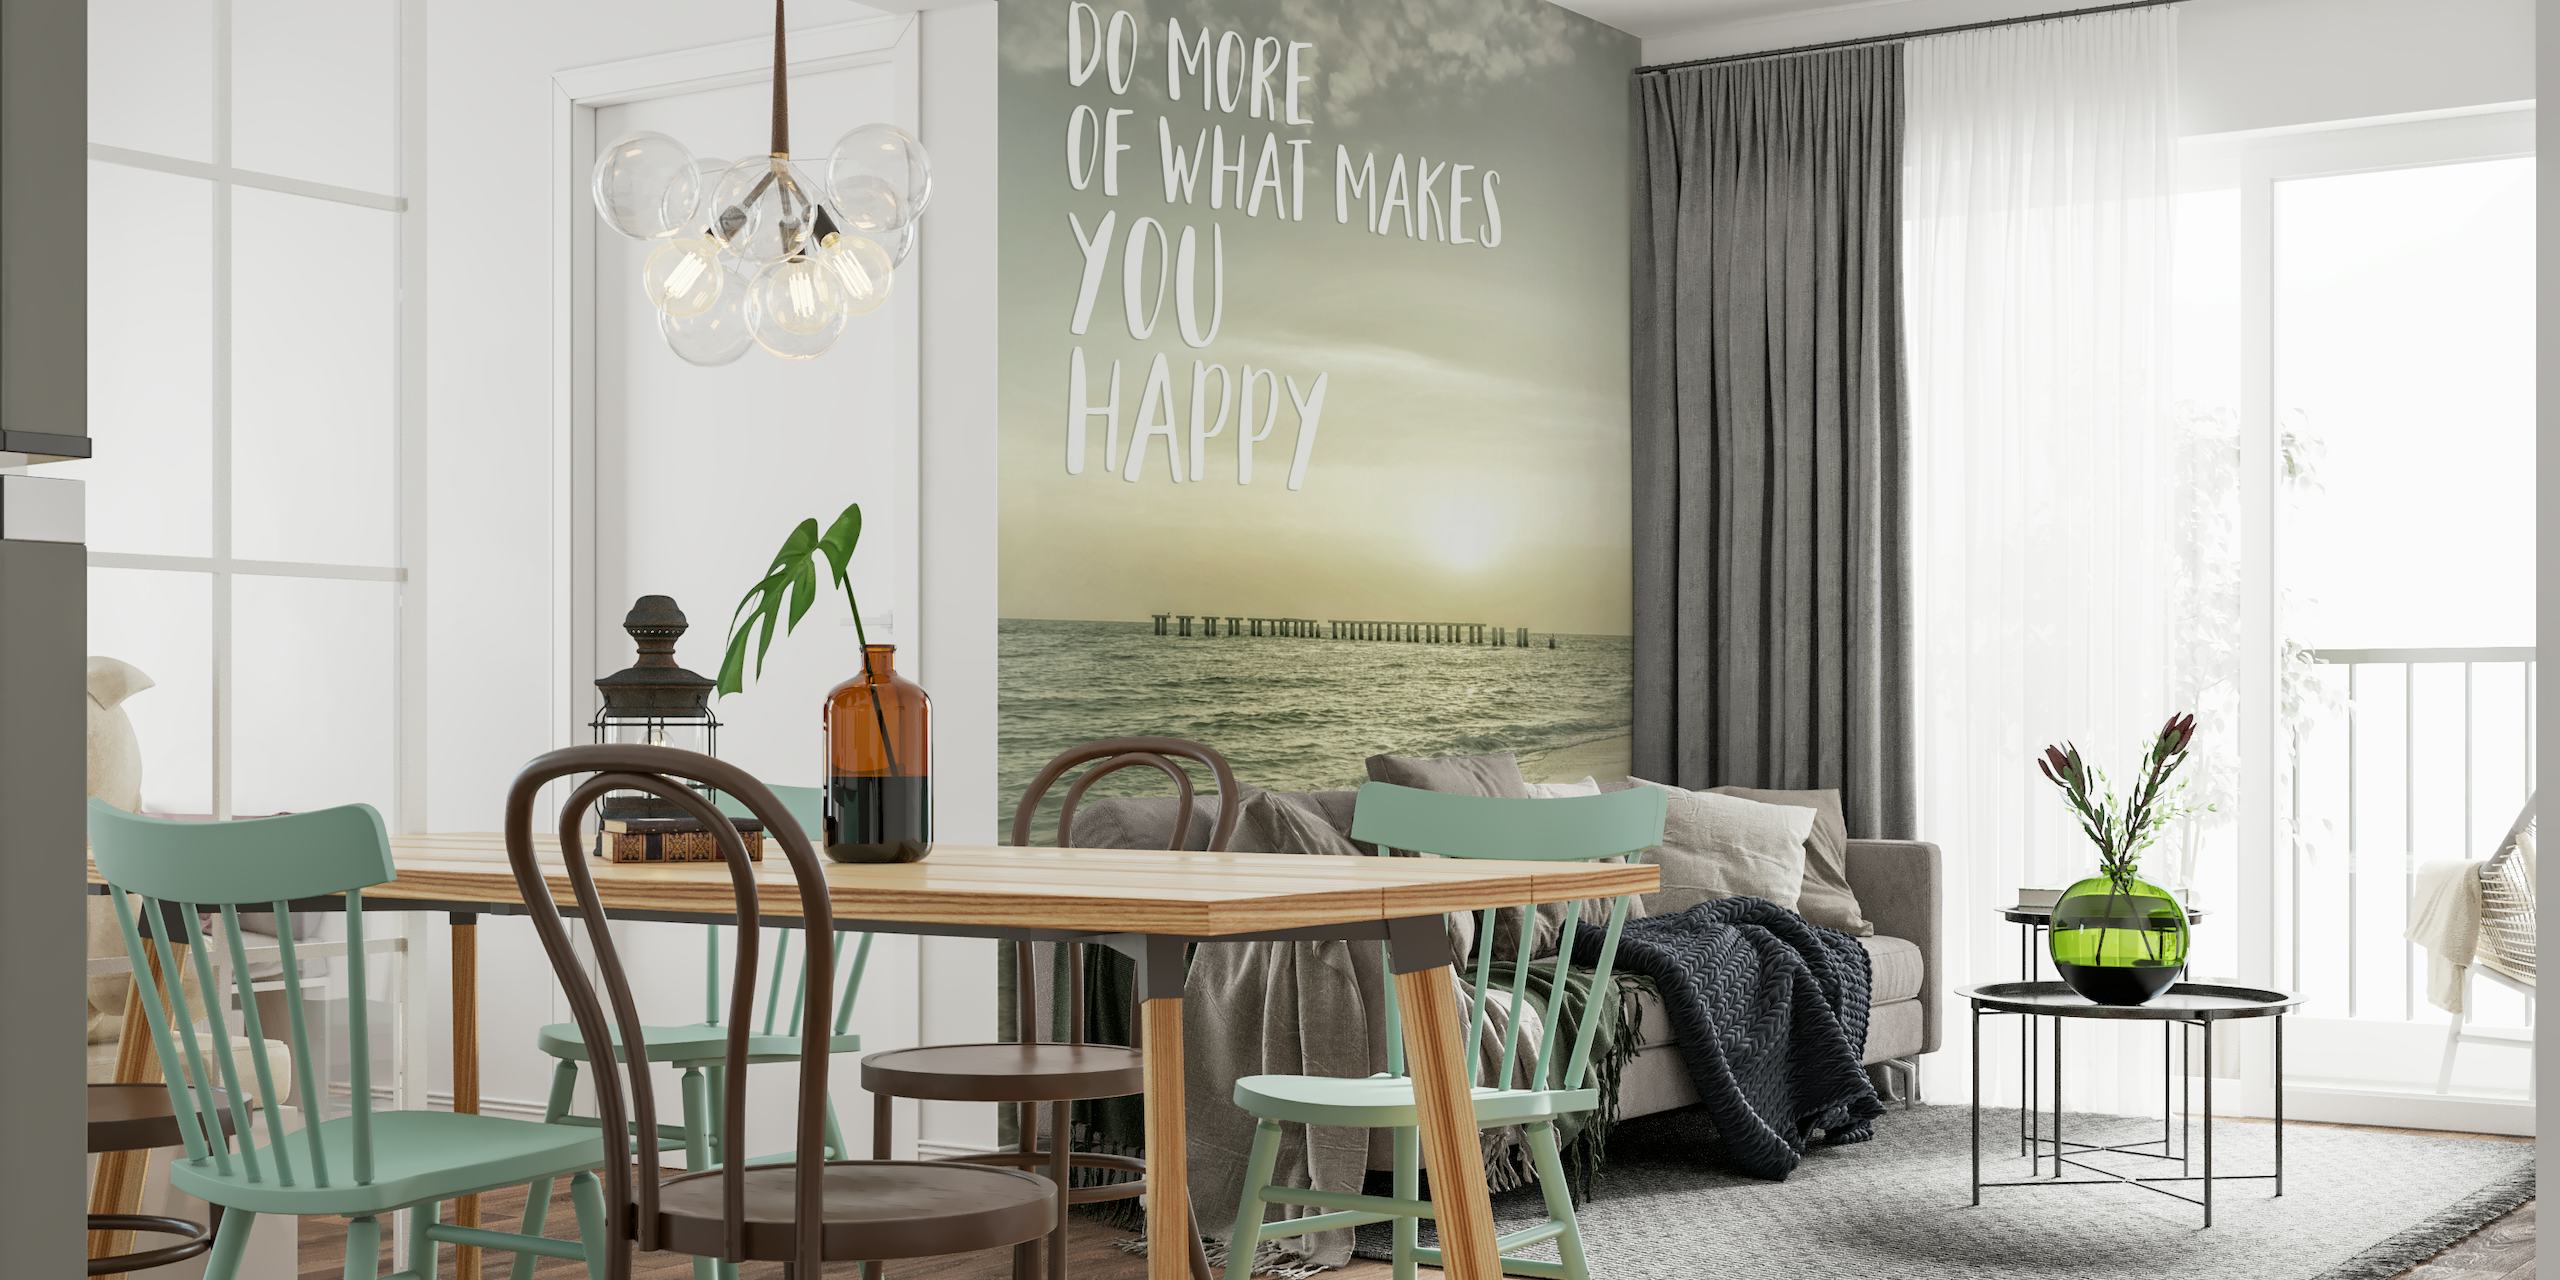 Do more of what makes you happy | Sunset tapet